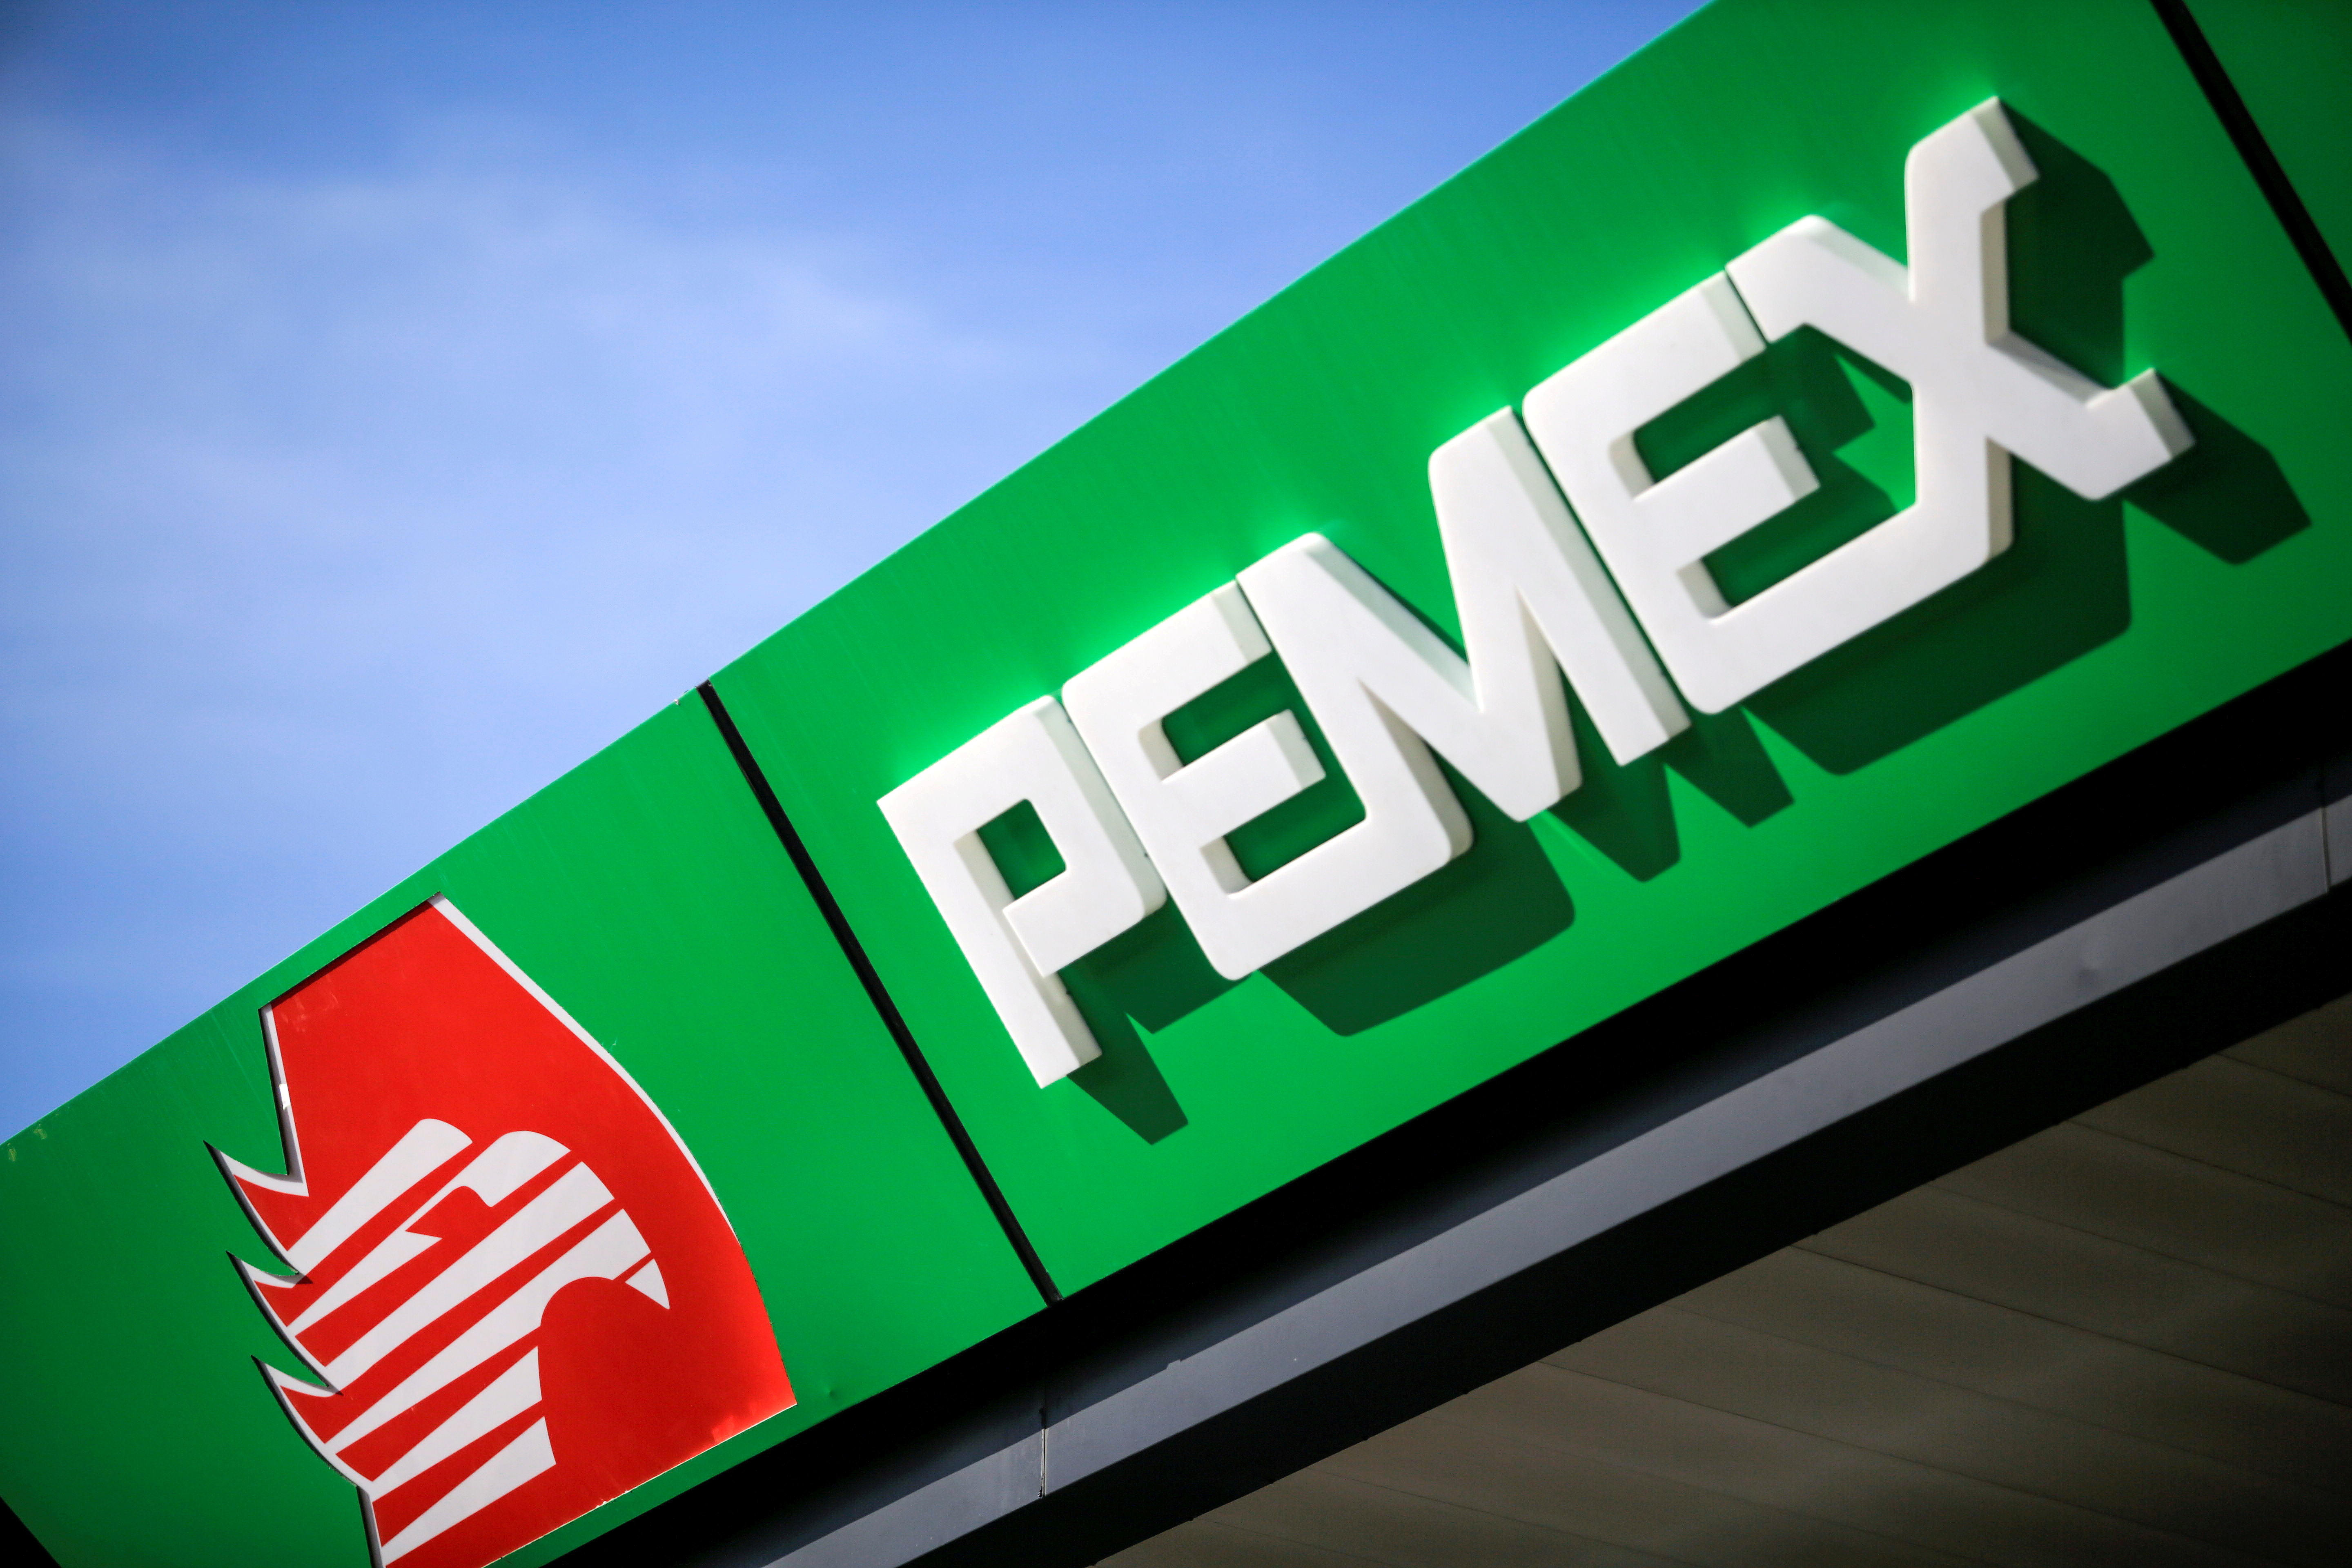 The logo of Mexican state oil company Petroleos Mexicanos (Pemex) is pictured at a gas station in Ciudad Juarez, Mexico February 27, 2020. REUTERS/Jose Luis Gonzalez